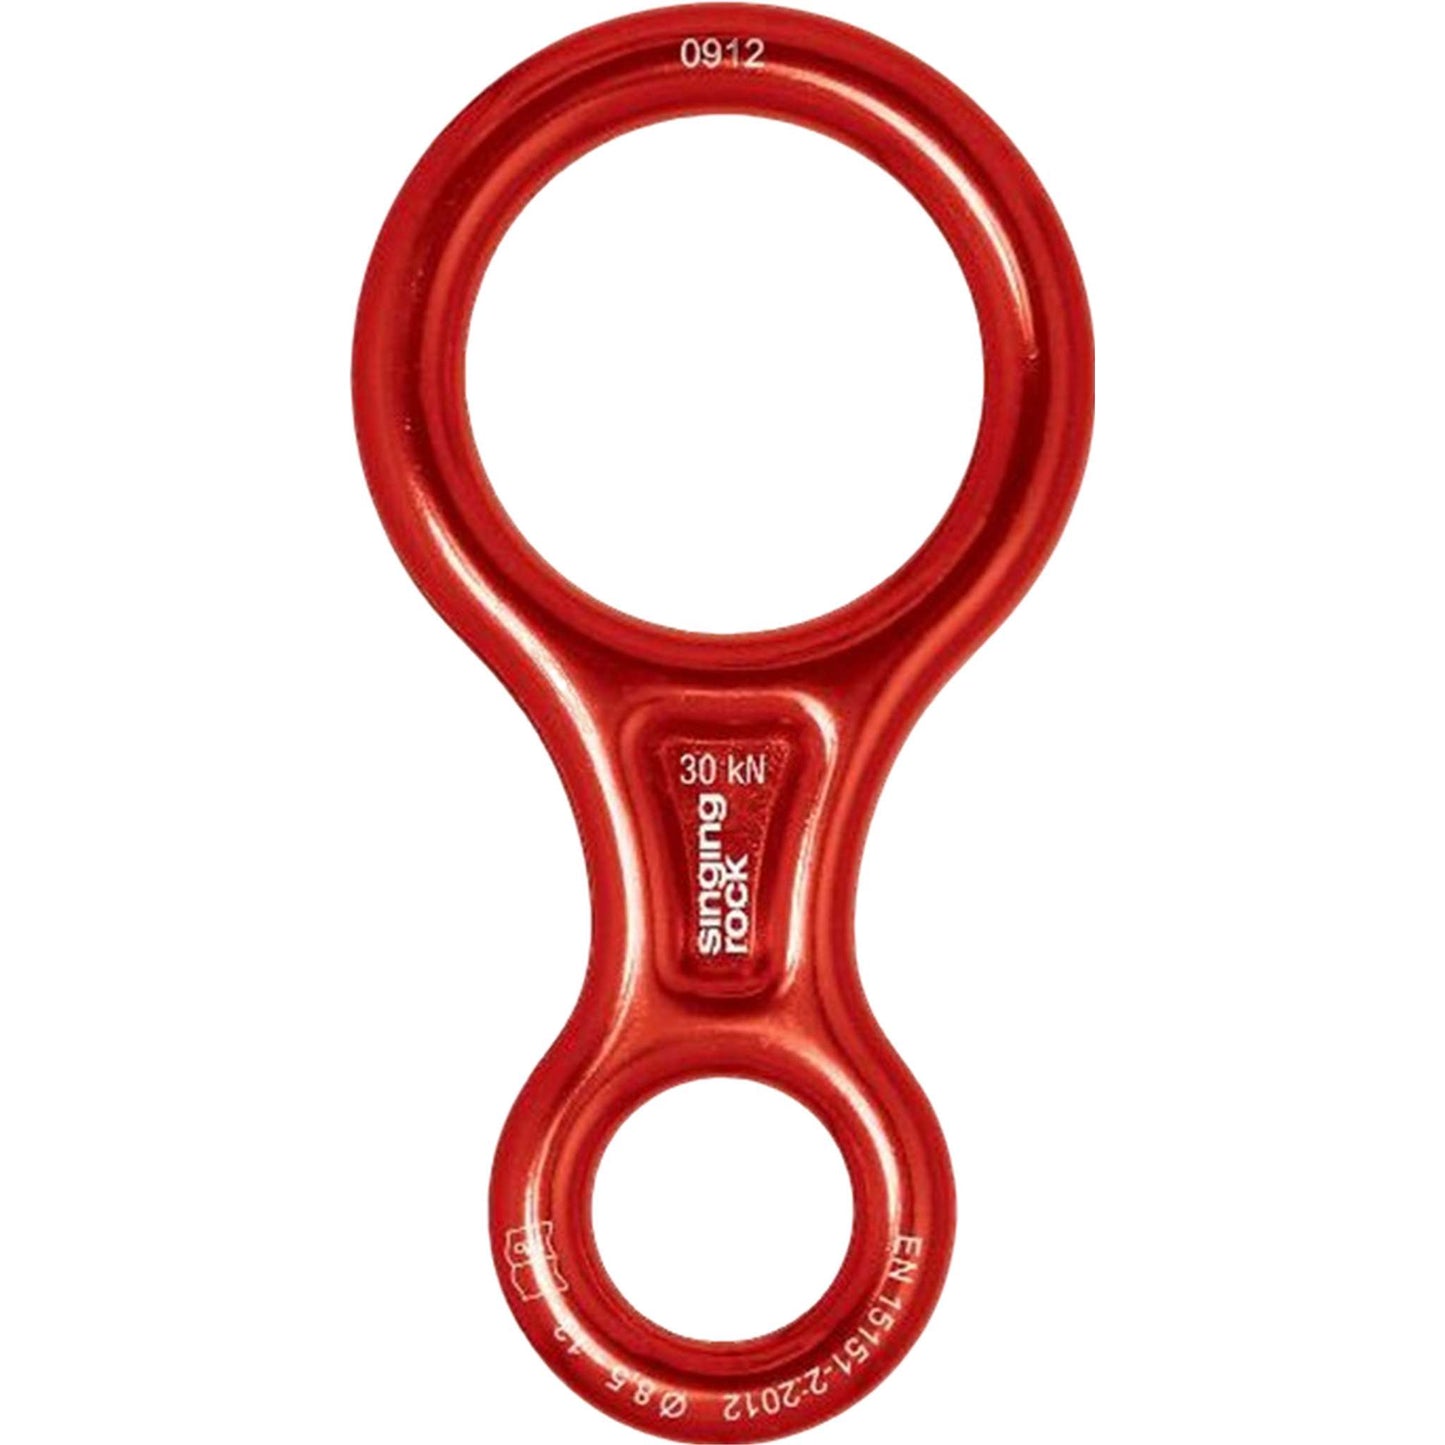 Figure 8 L - Classic Belay & Rappel Device for Enhanced Safety in Climbing Adventures